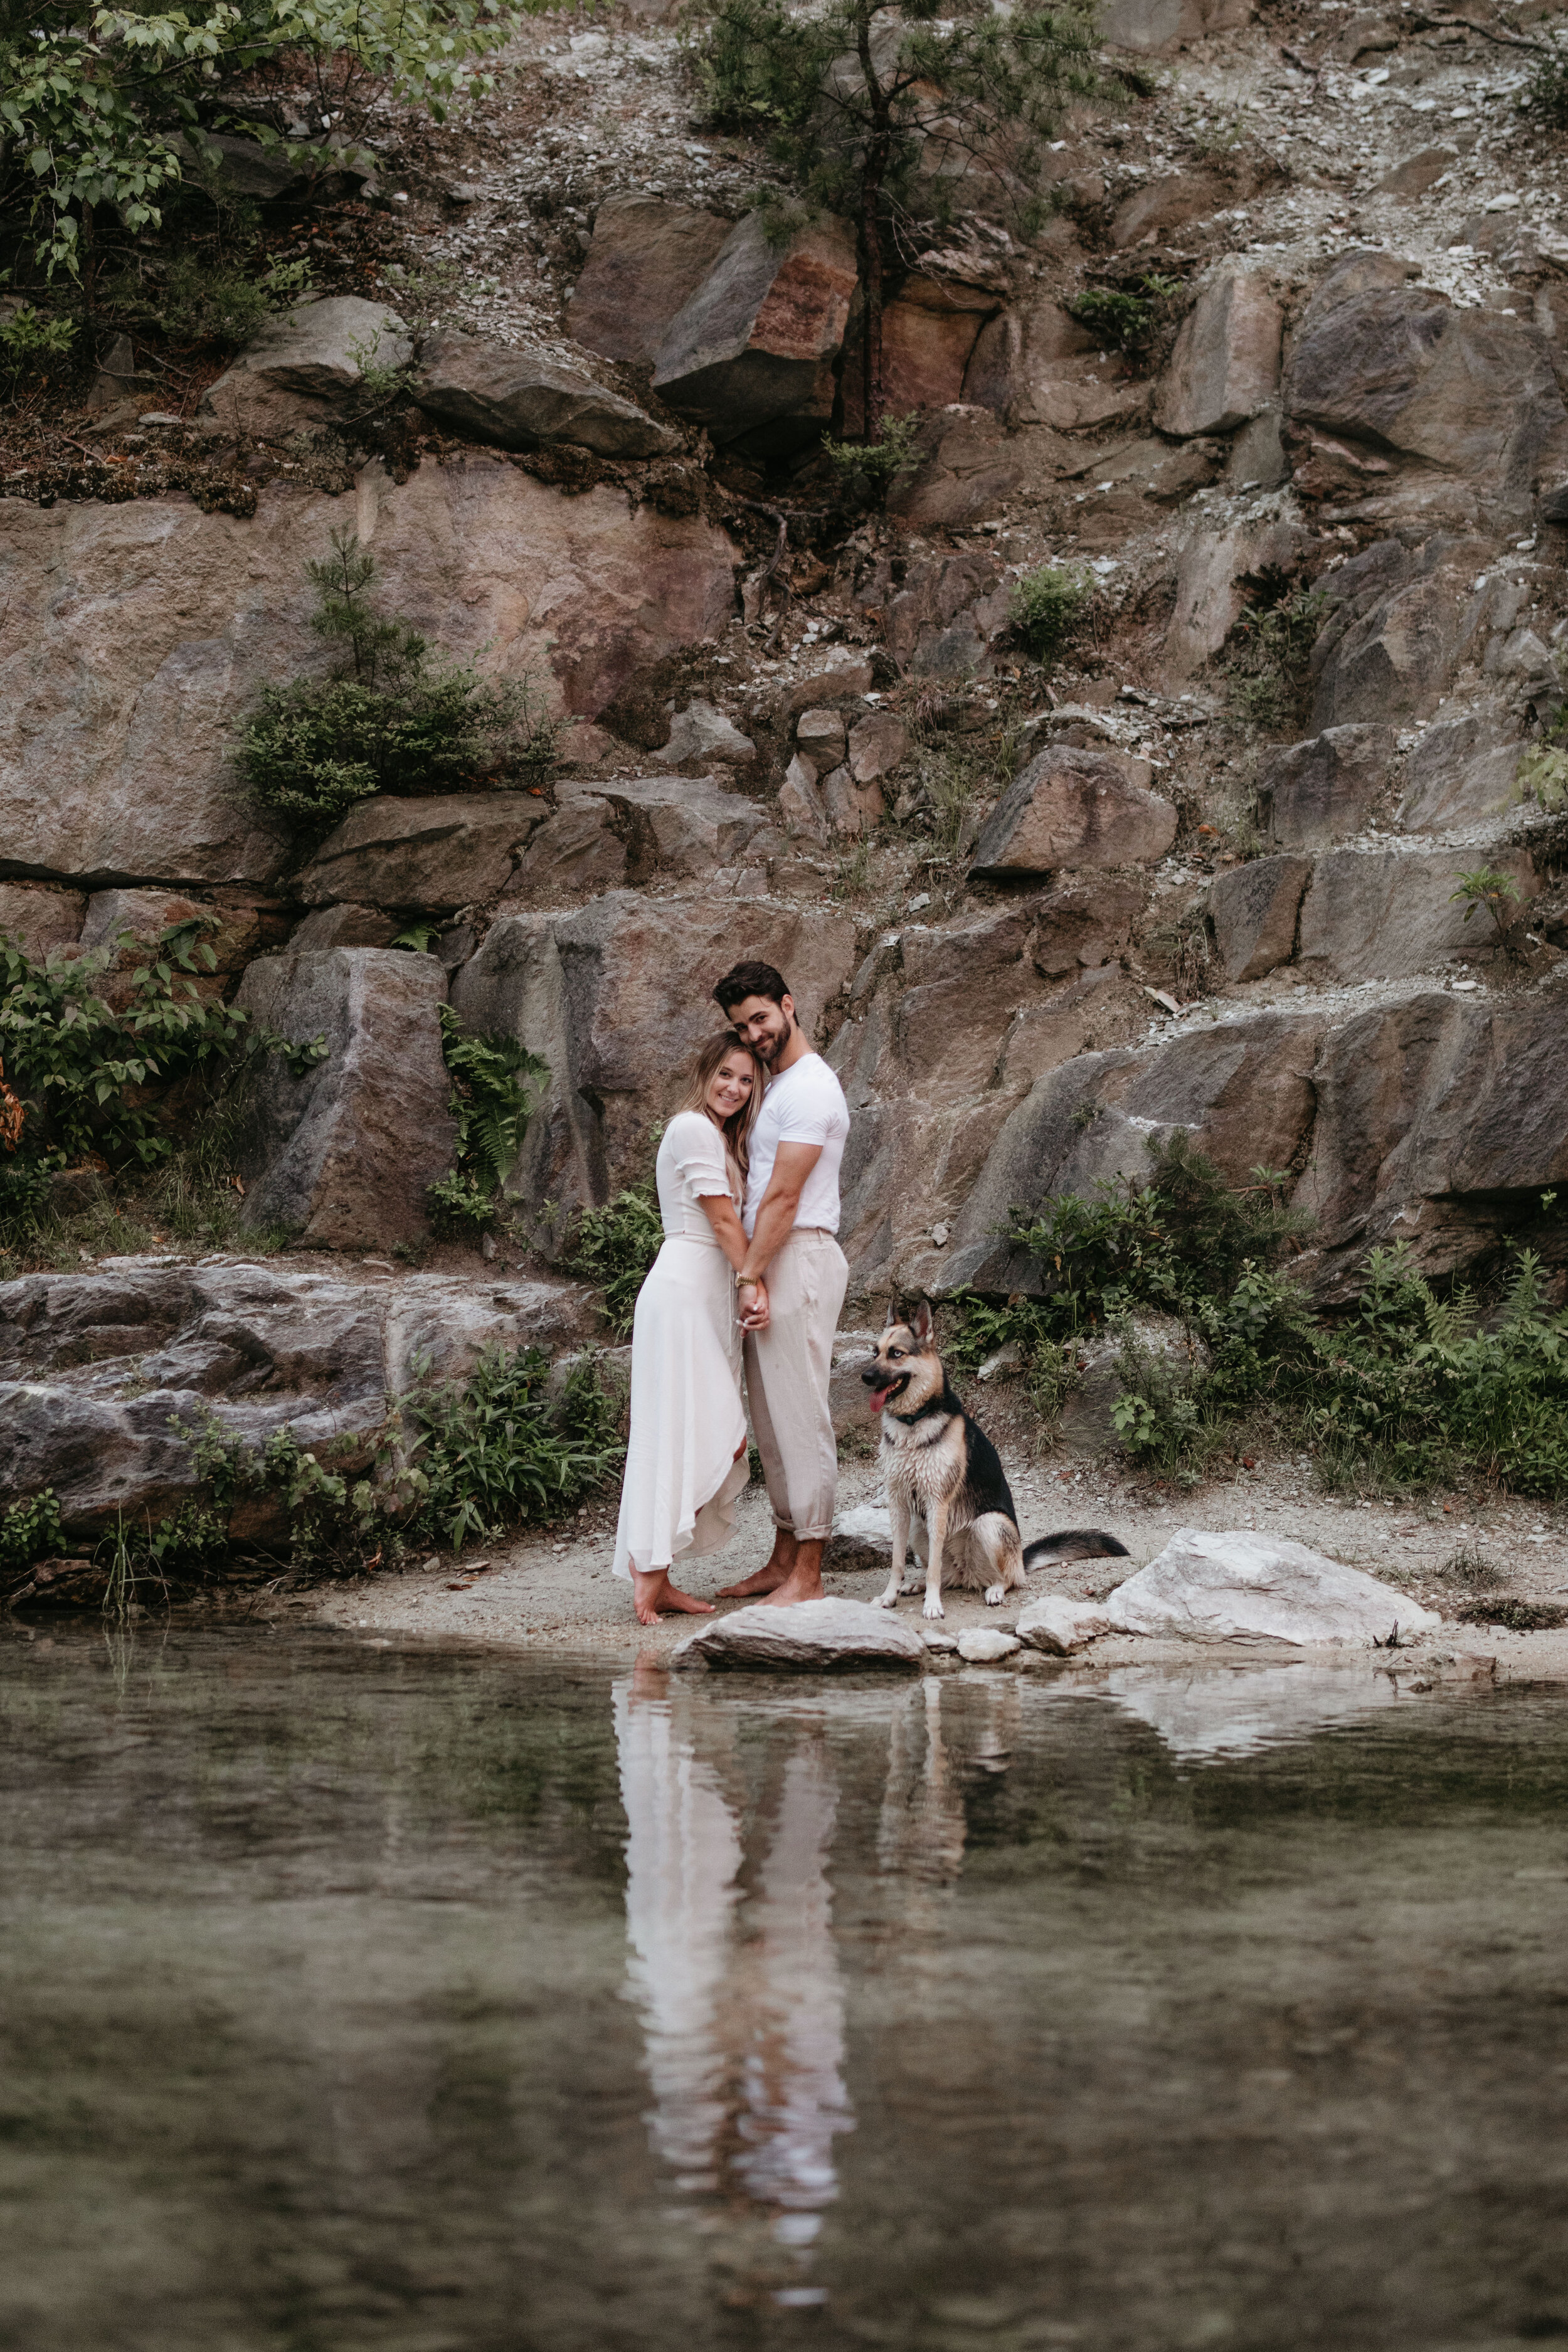 Nicole-Daacke-Photography-michaux-state-forest-elopement-adventure-engagement-session-pennsylvania-elopement-pa-elopement-photographer-gettysburg-photographer-state-park-elopement-engagement-session-pennsylvania-waterfall-176.jpg